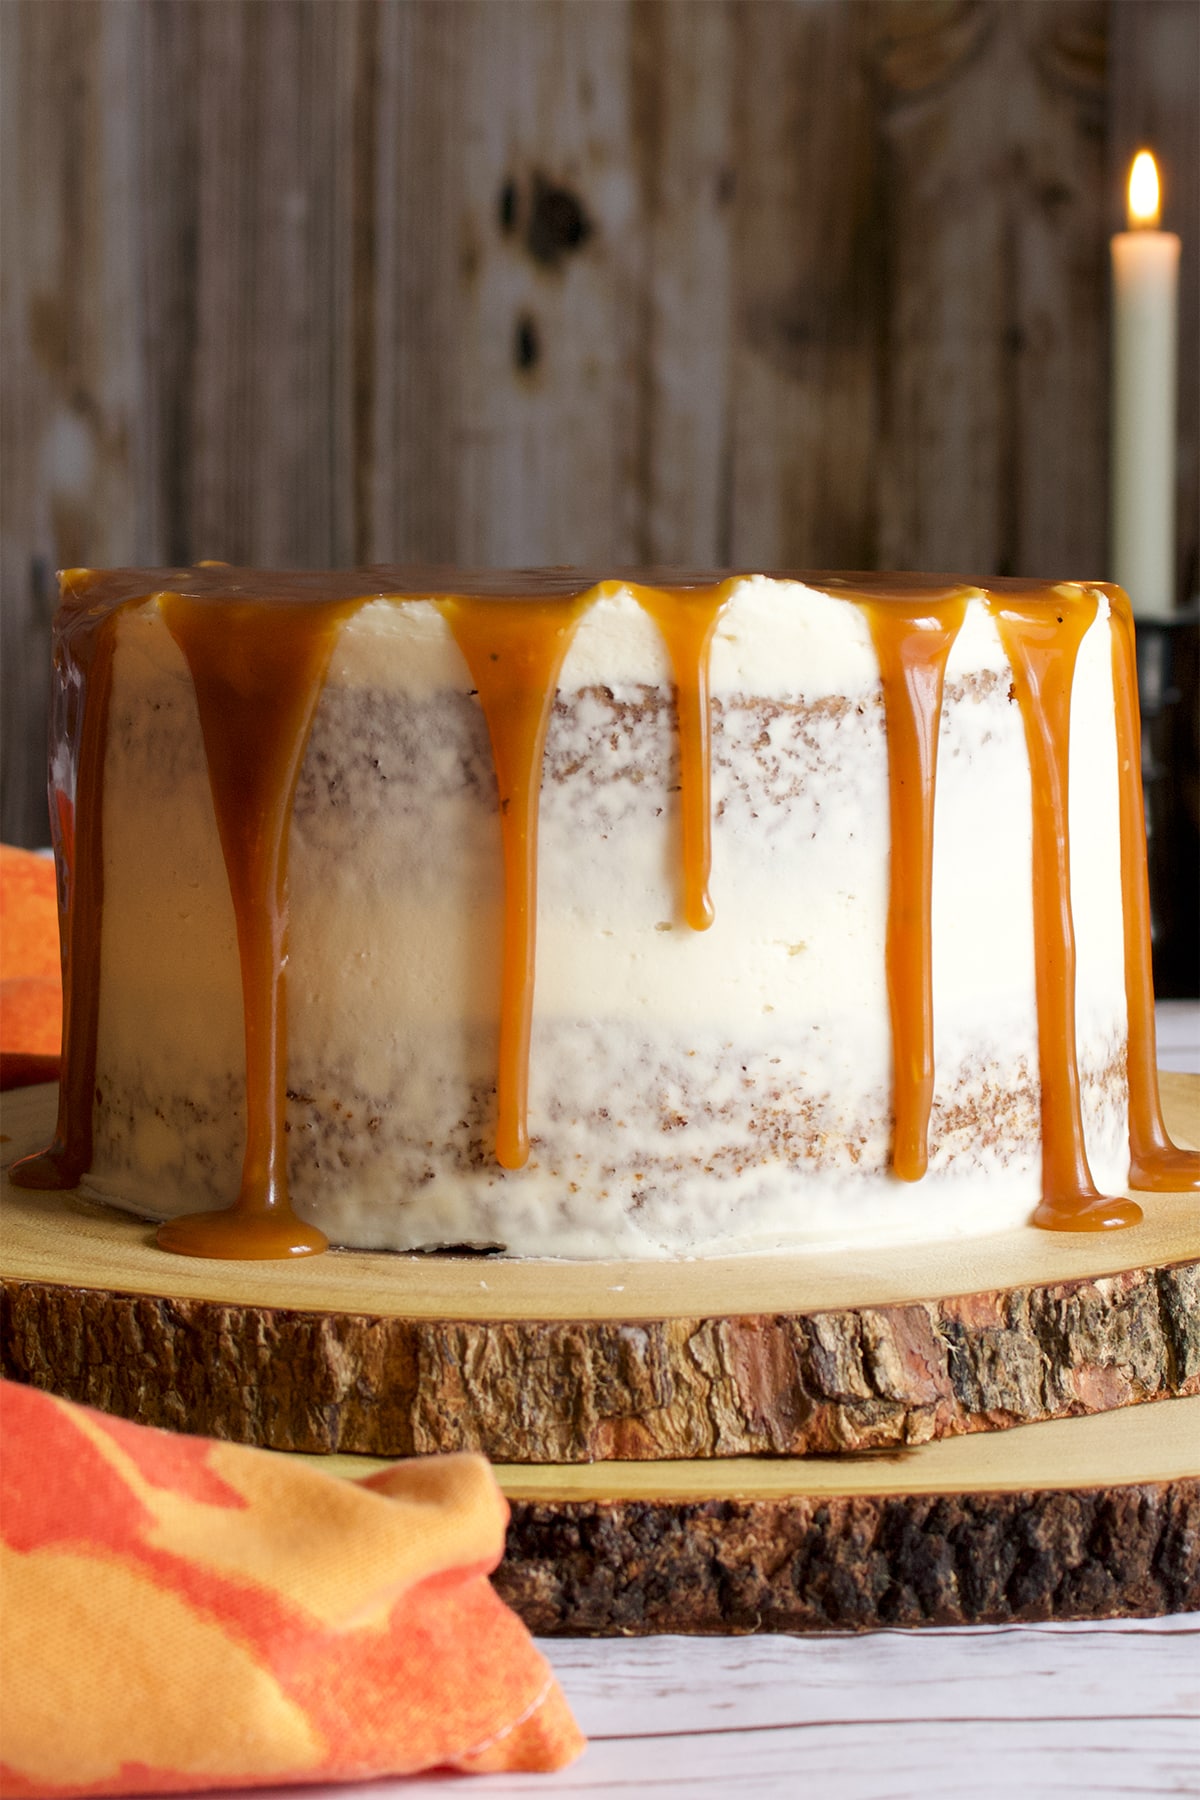 A two layer carrot cake covered in cream cheese buttercream and drizzled with caramel rum sauce.